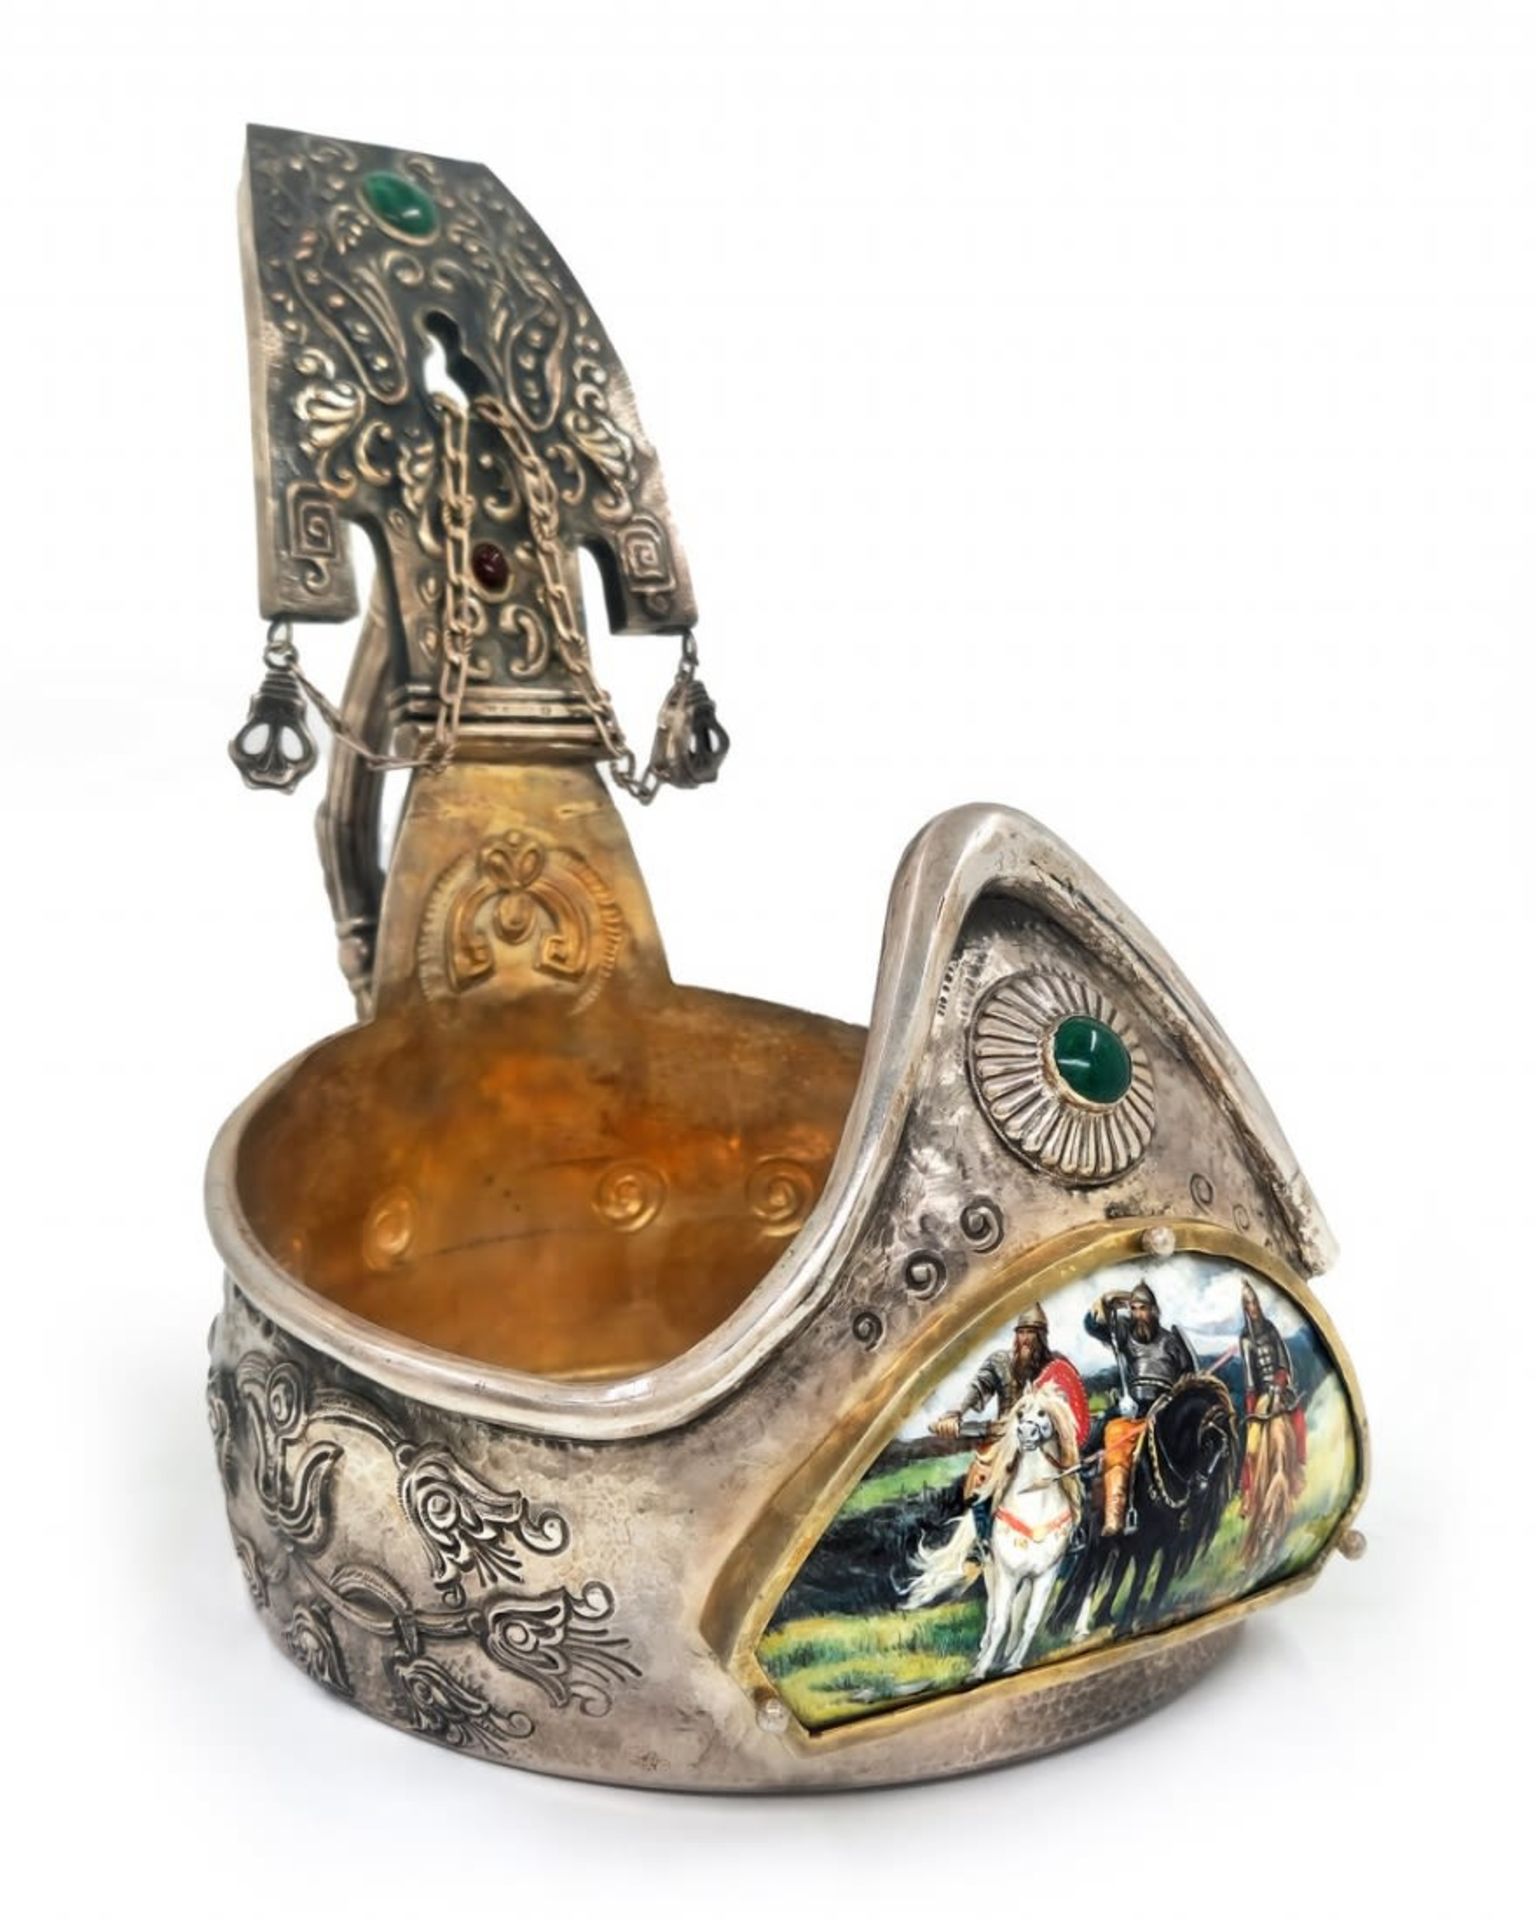 A high-quality and impressive Kovsh, made of silver, decorated with enamel and signed, Total weight: